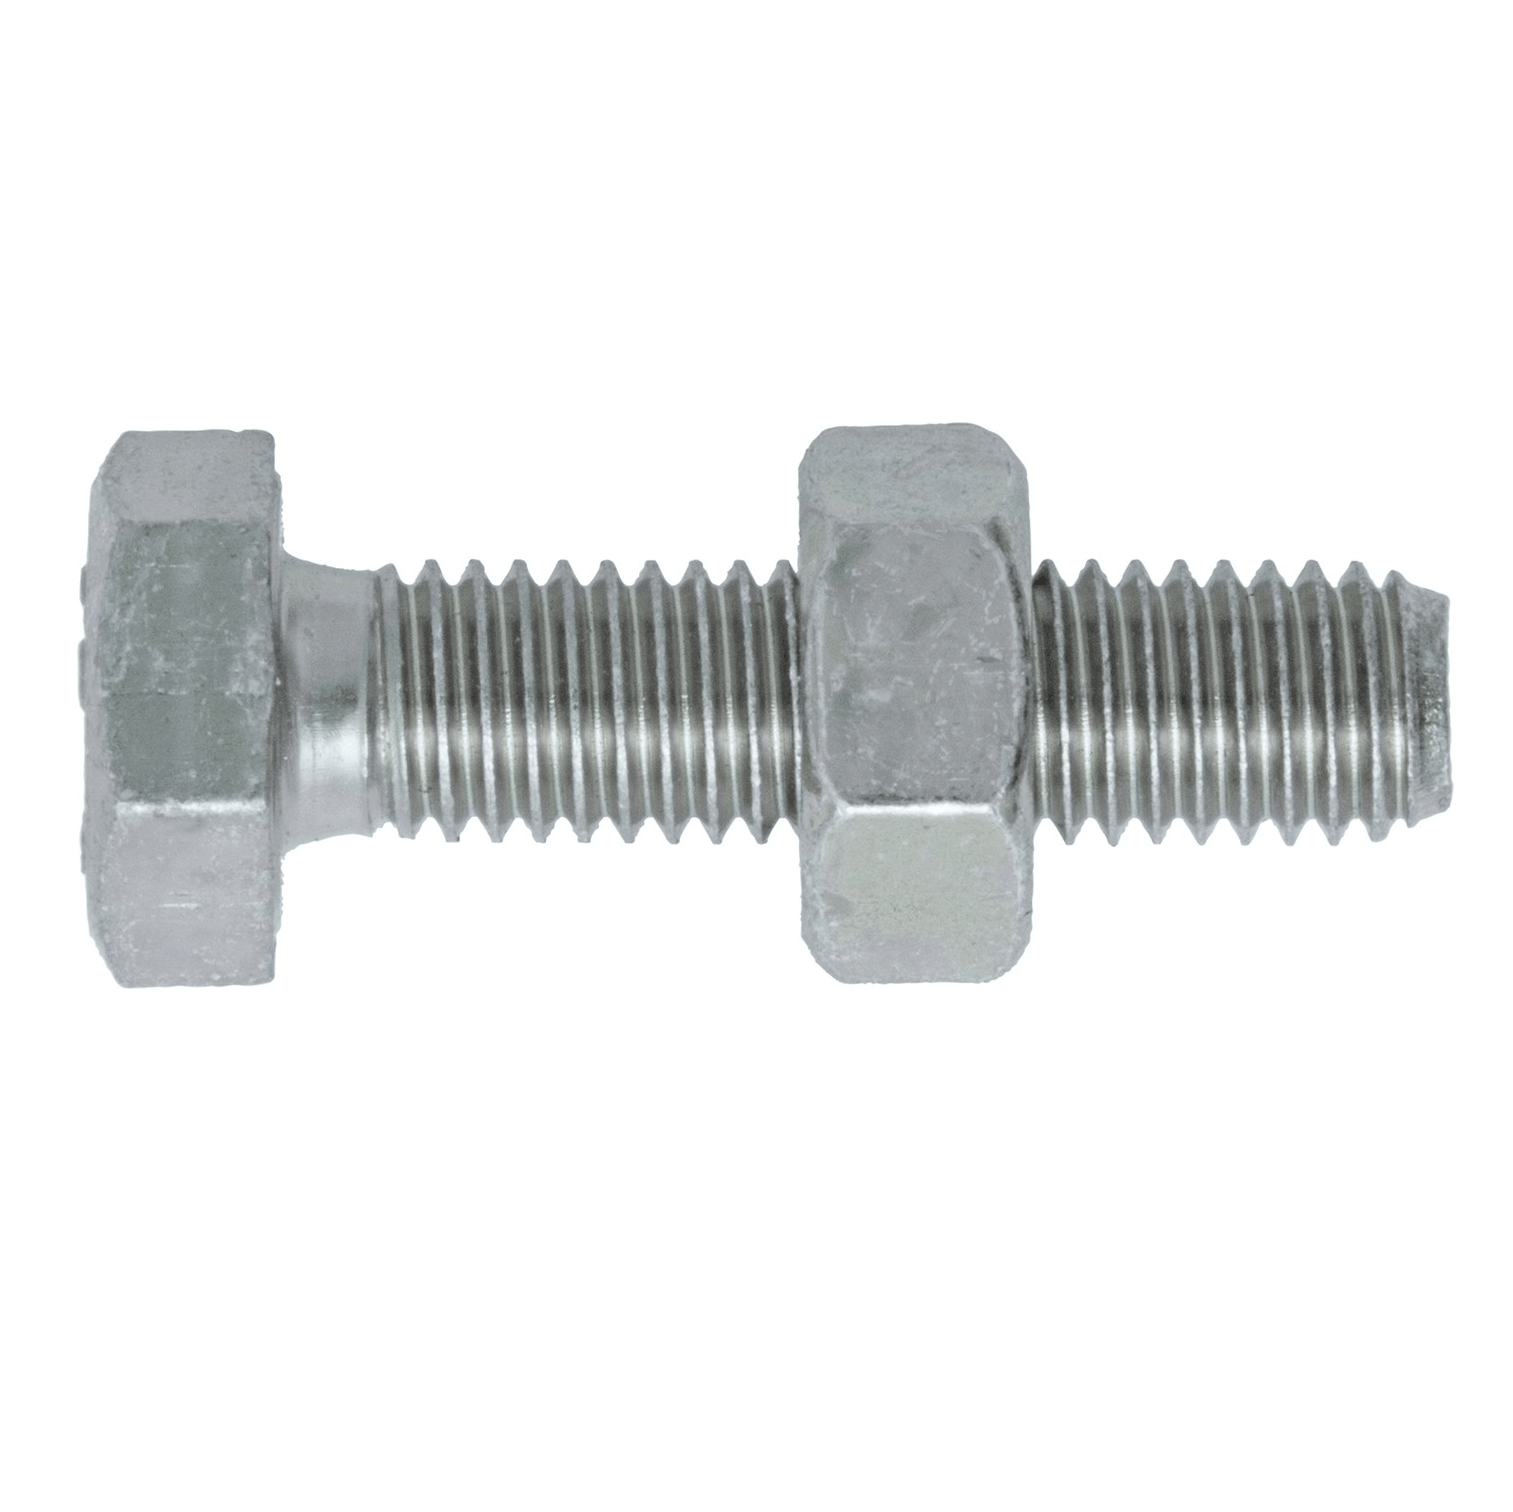 Assorted Set Screws with Nuts M6 – 200 Pieces